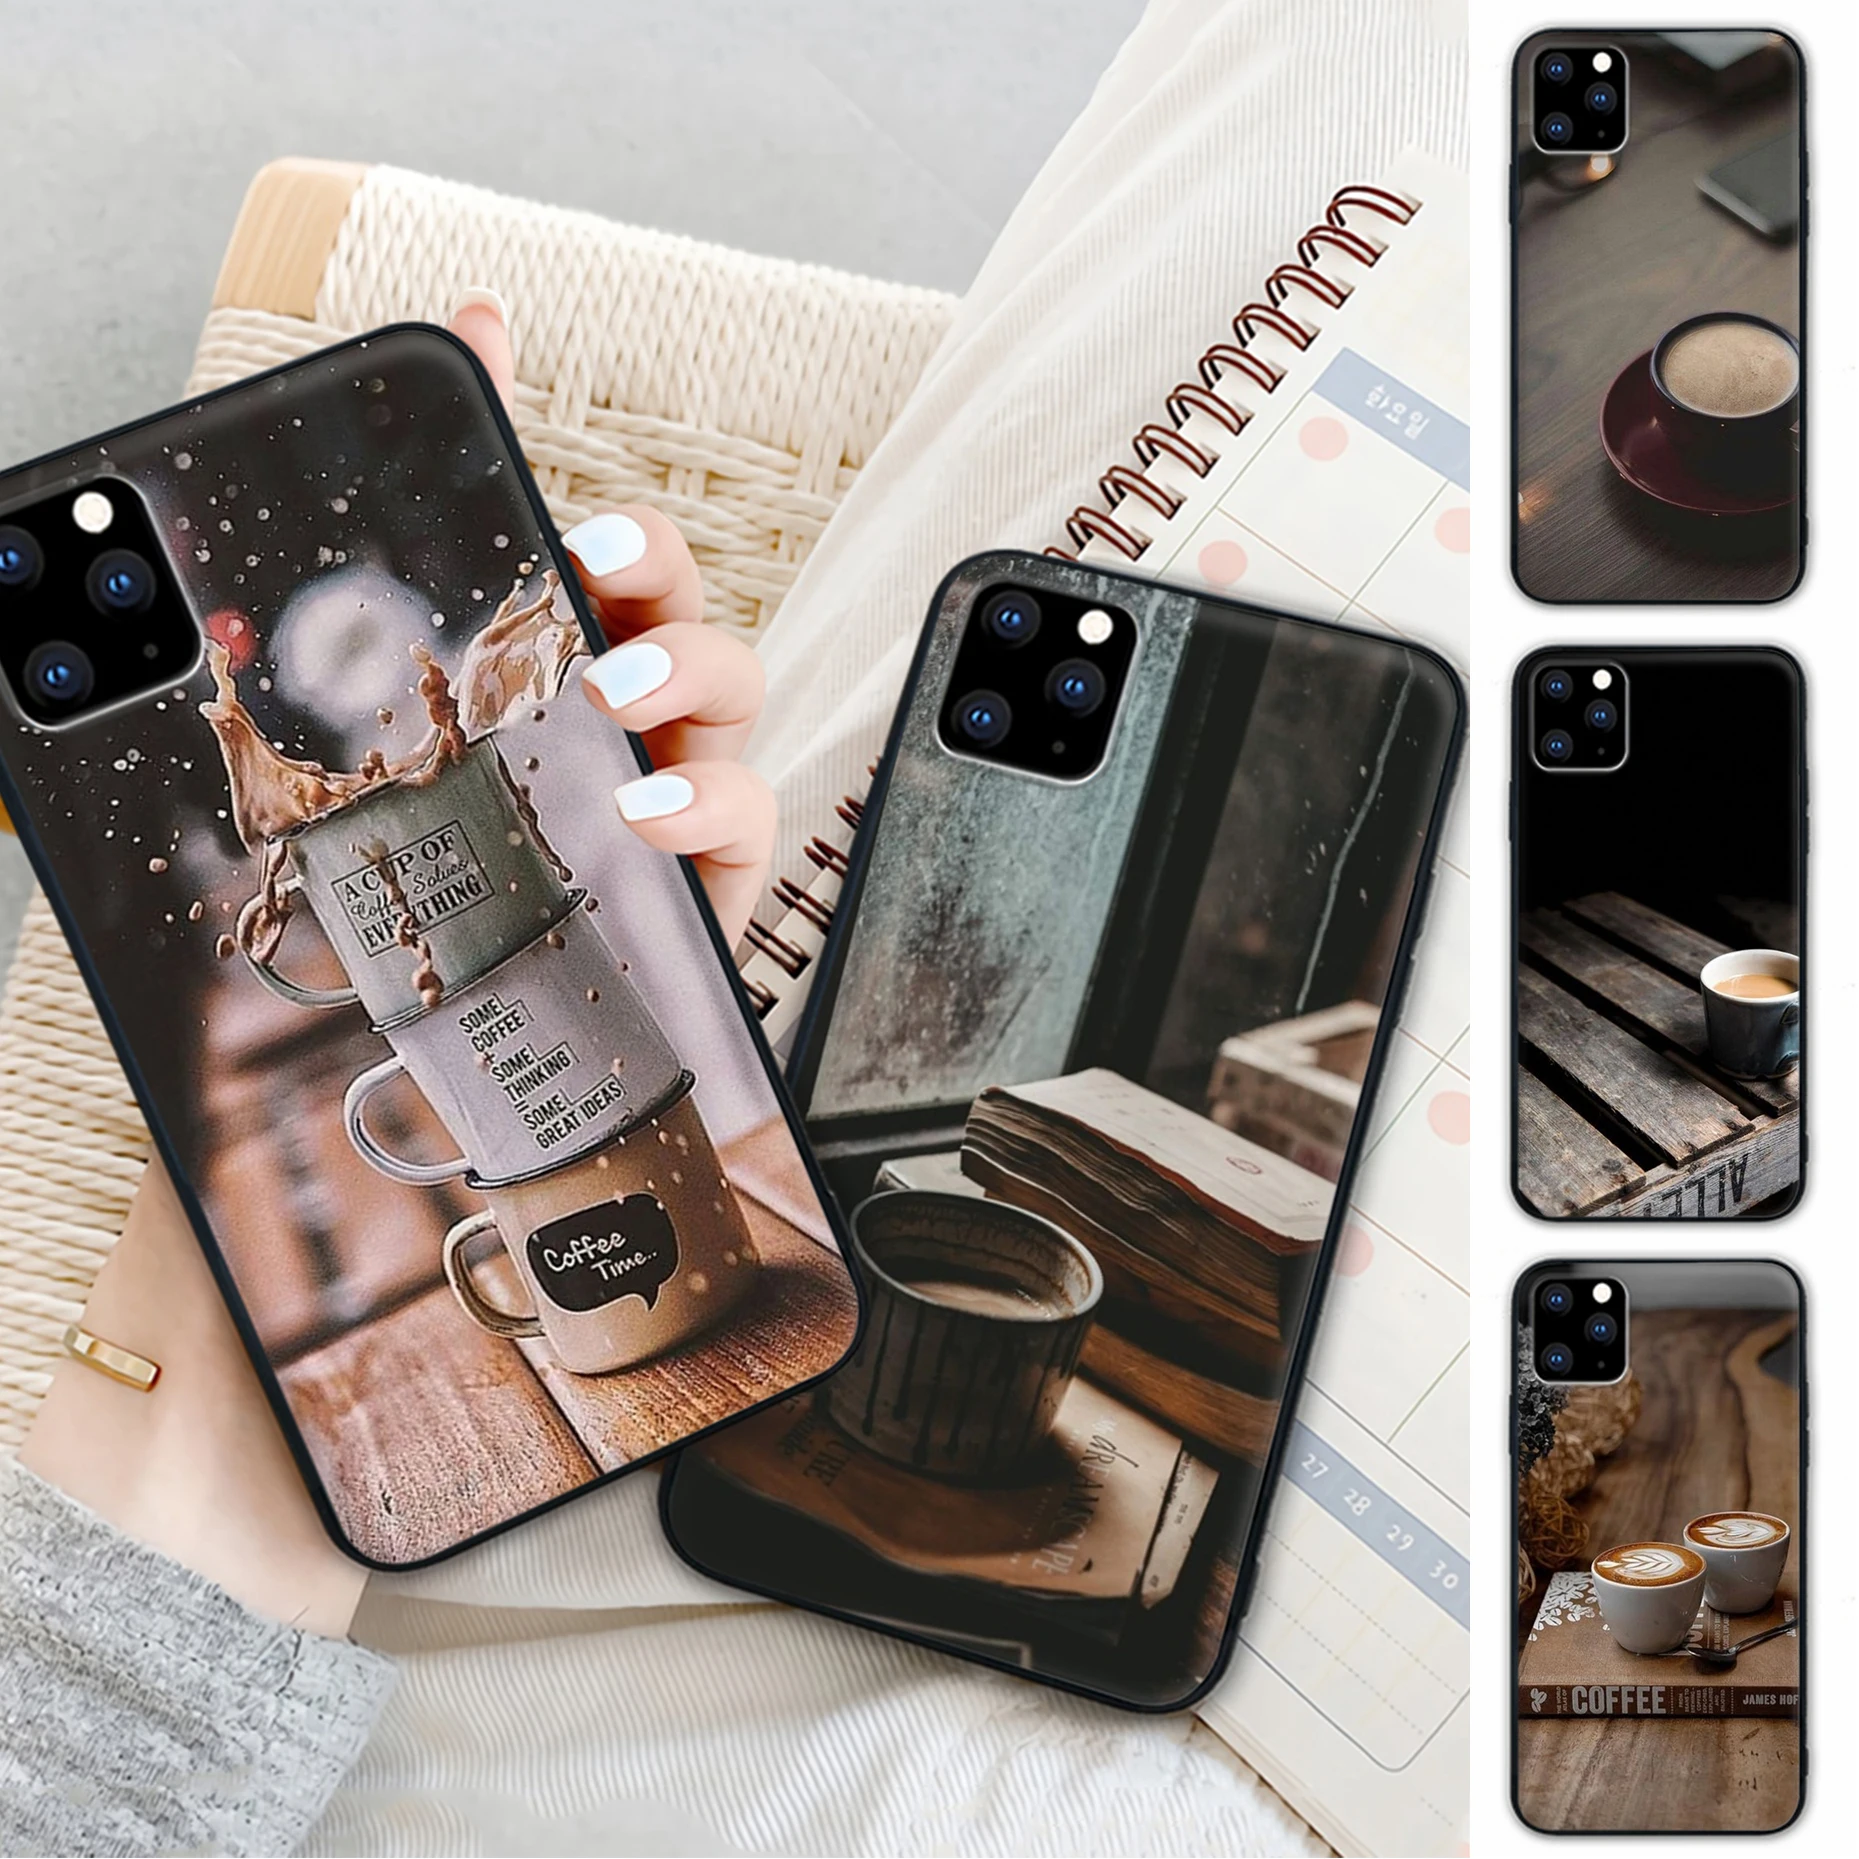 

For Men A Cup Of Coffee Mobile Telephone Cover Case For Samsung Galaxy M30S A01 A21 A31 A51 A71 A91 A10S A20S A30S A50S